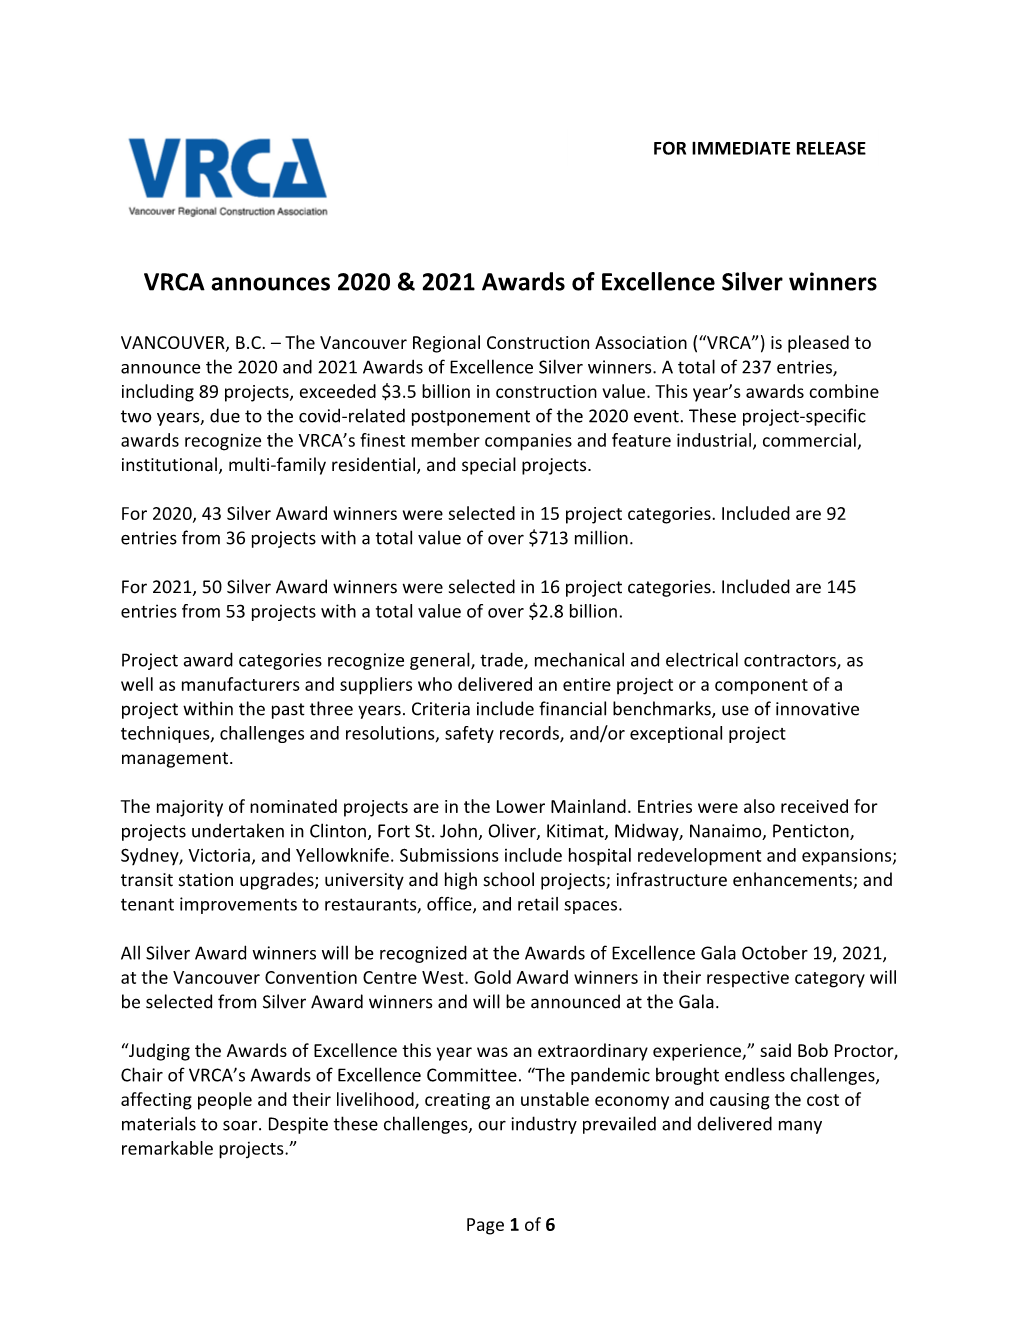 VRCA Announces 2020 & 2021 Awards of Excellence Silver Winners